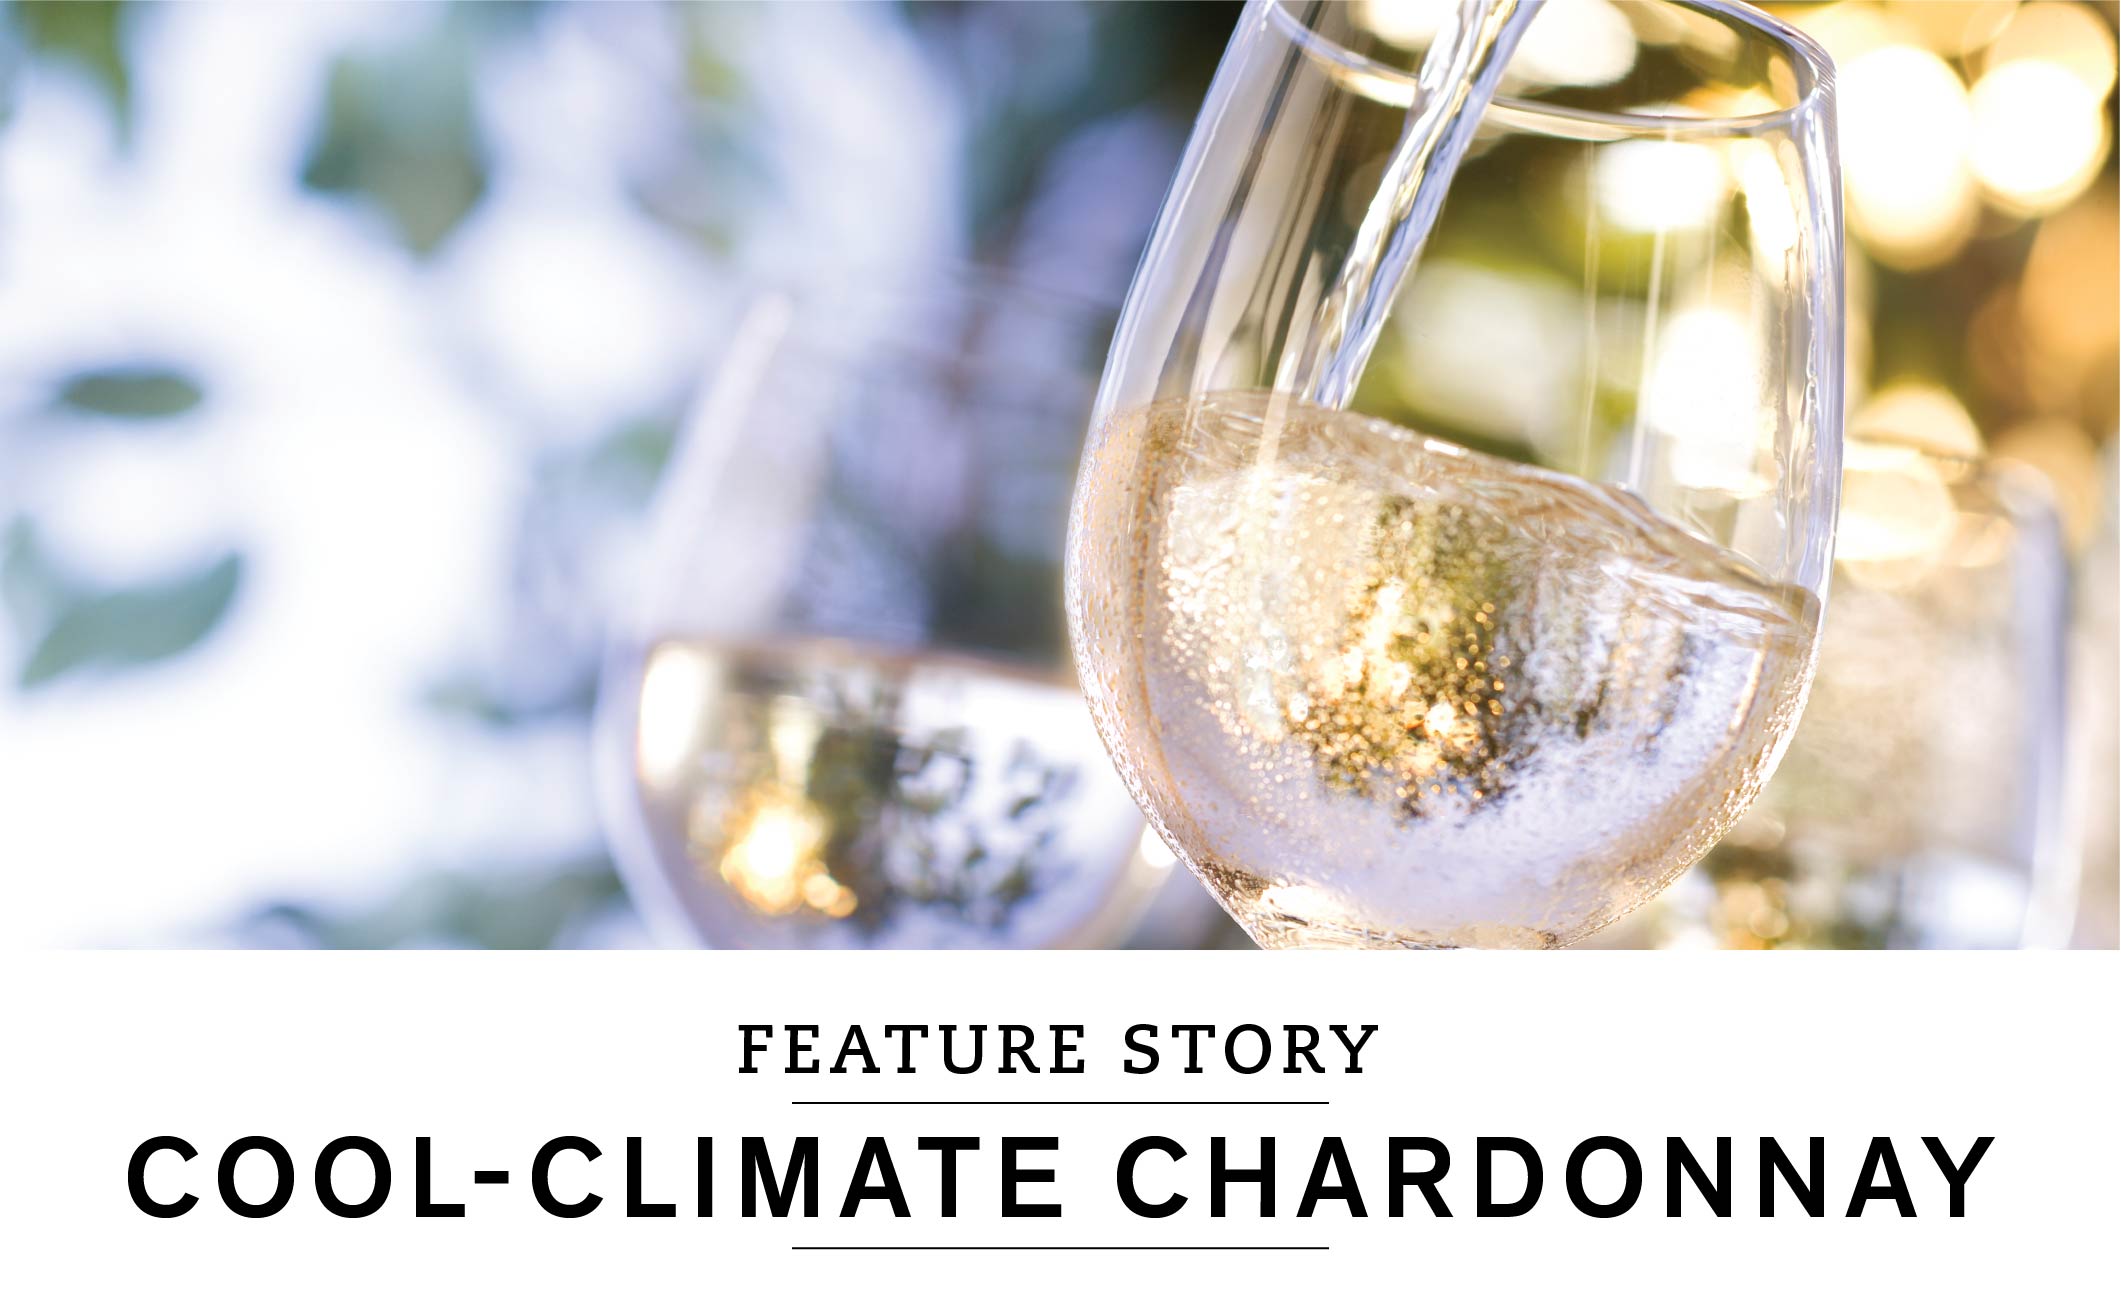 FEATURE STORY: COOL-CLIMATE CHARDONNAY